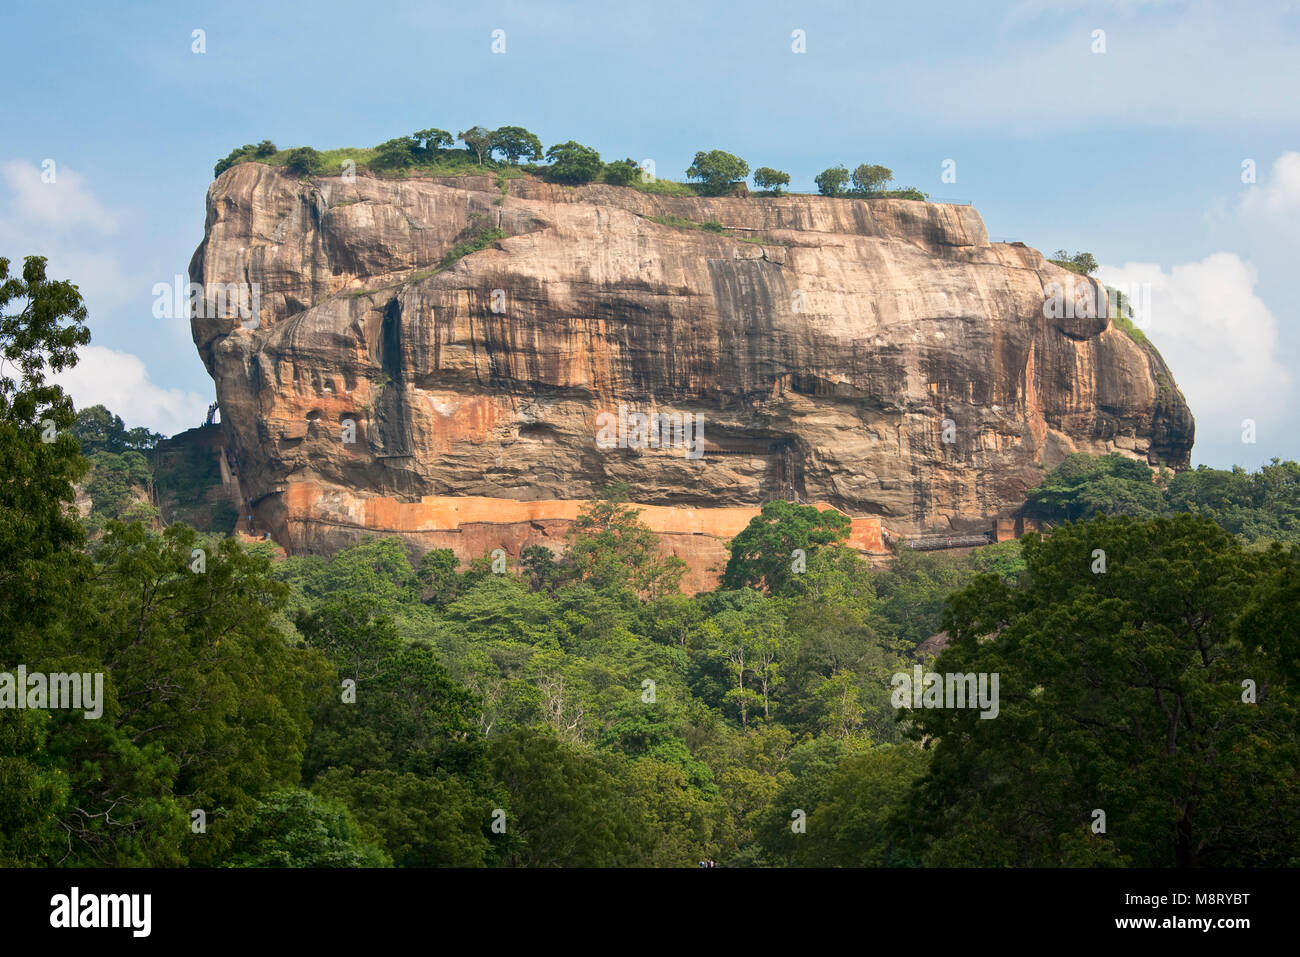 A view of Sigiriya Rock taken from the main public tourist road on a sunny day with blue sky. Stock Photo